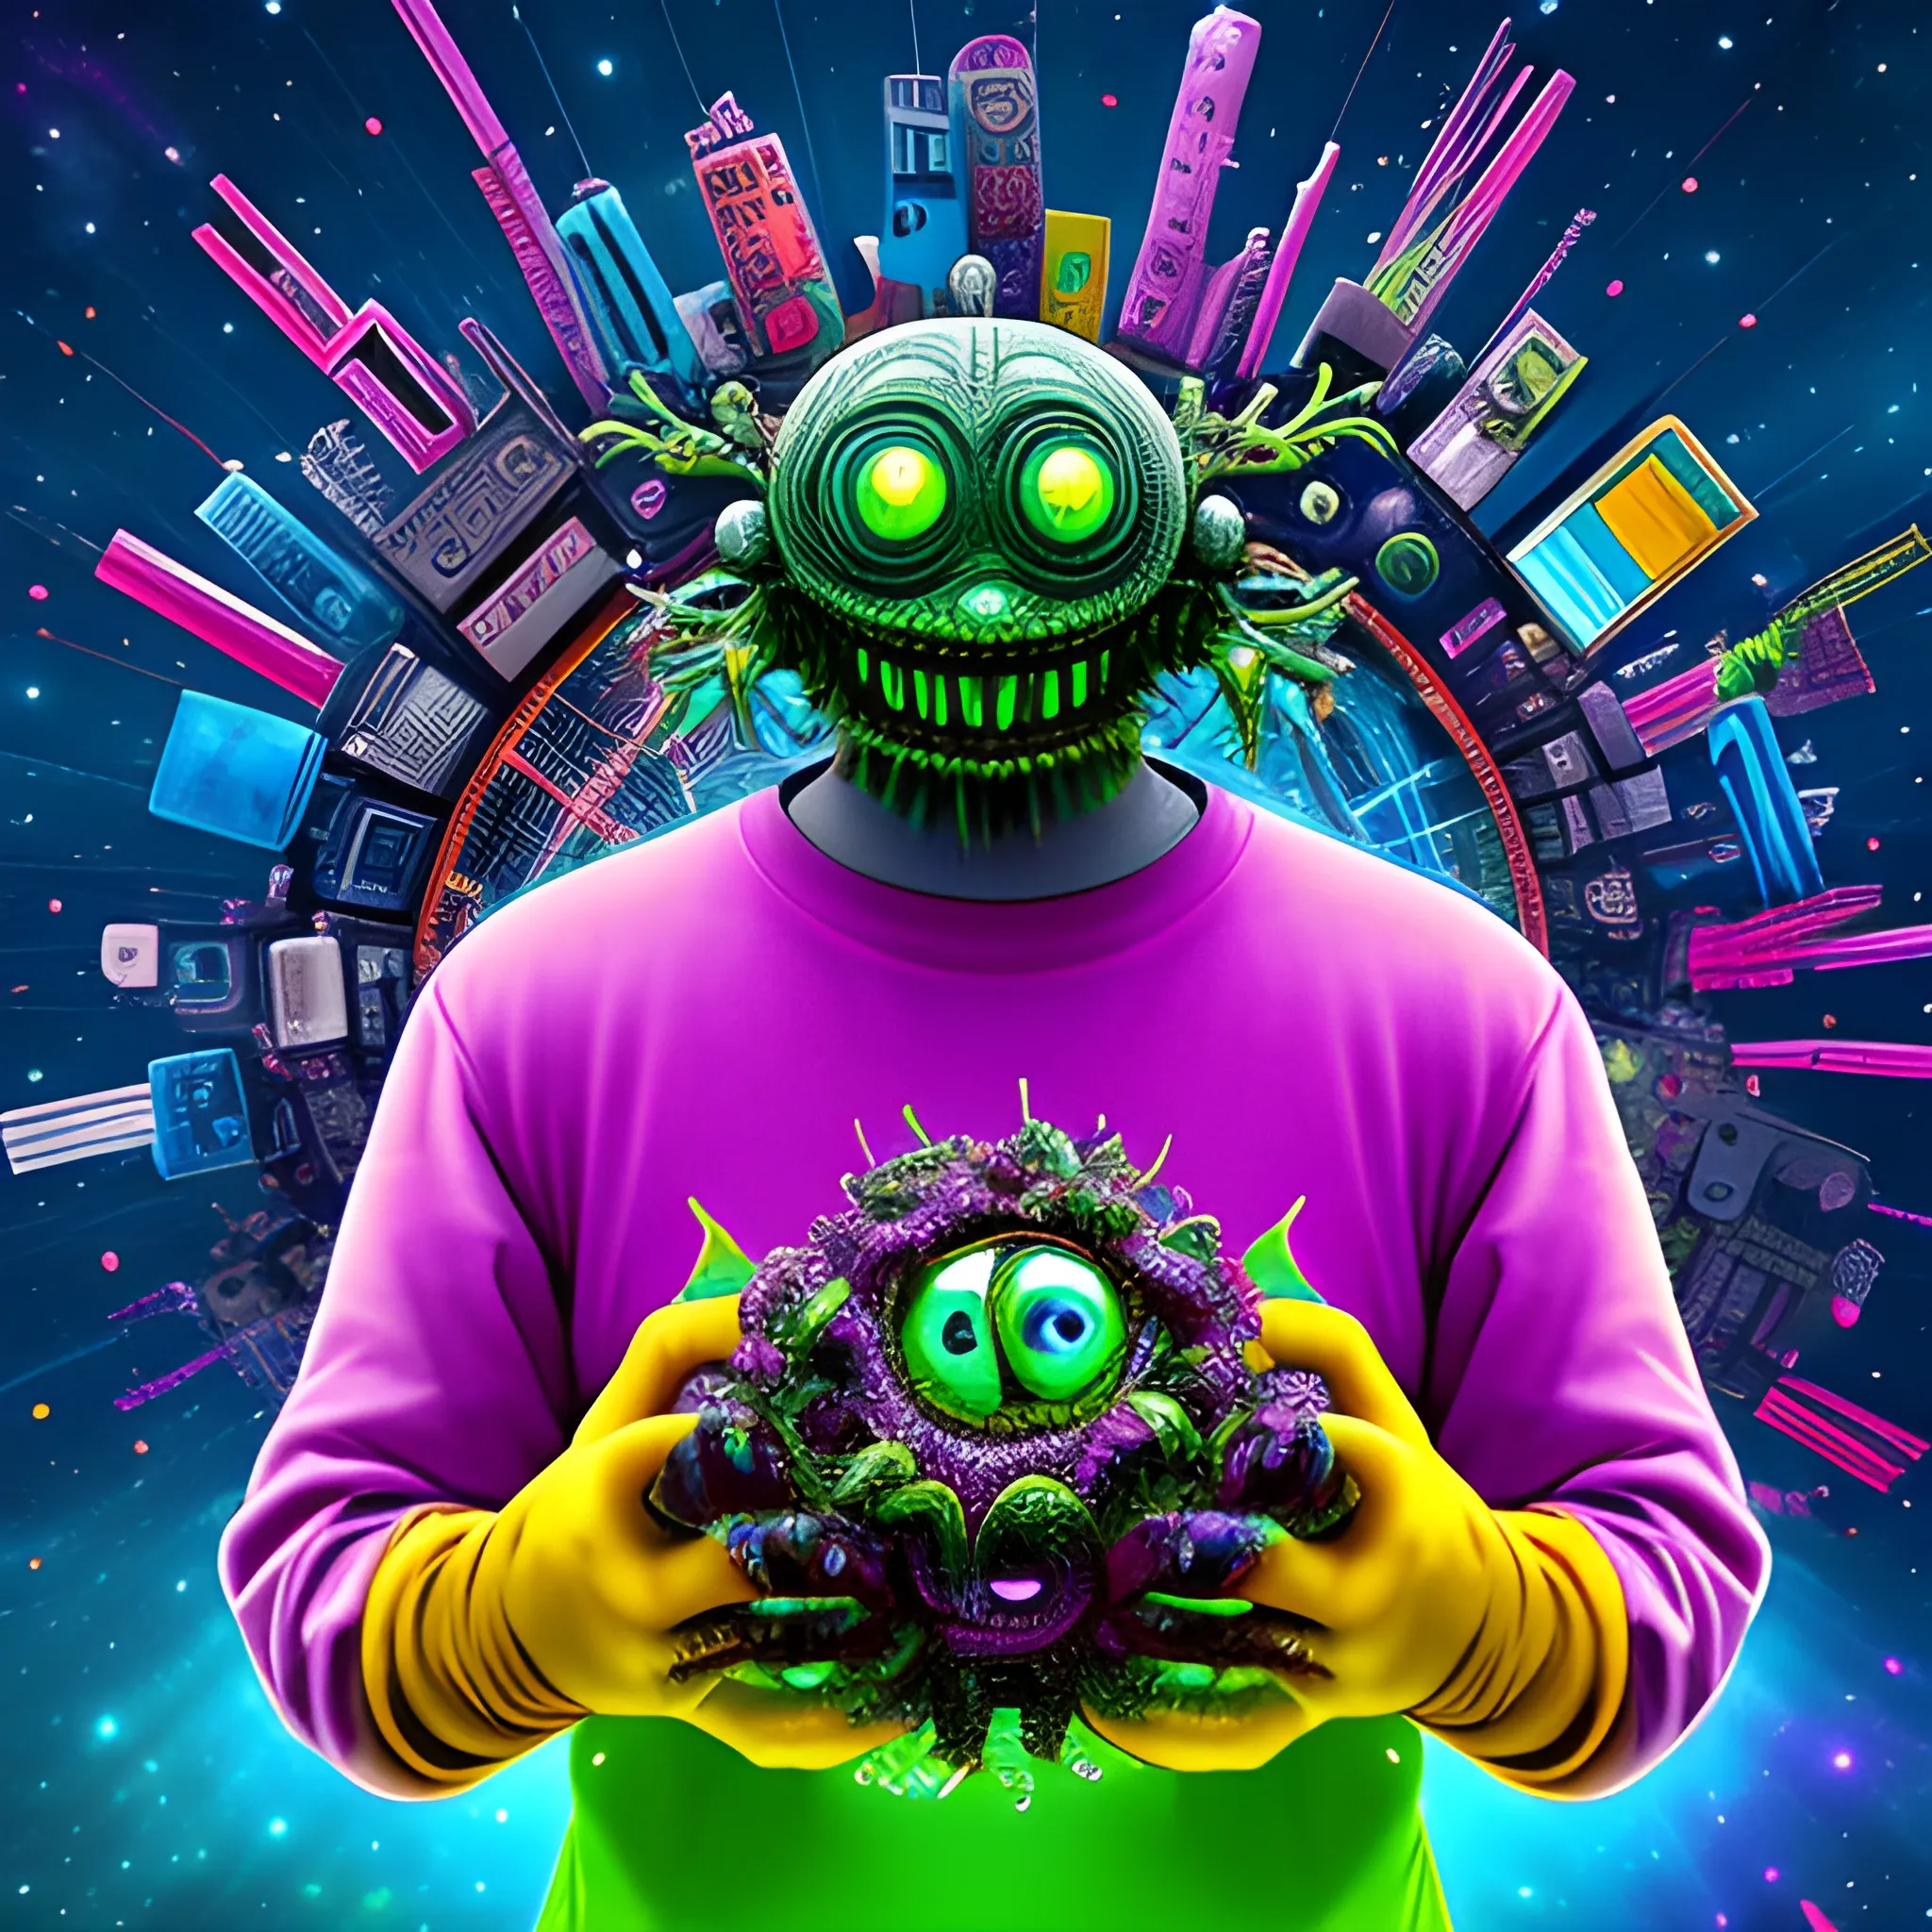 E-waste recycling advertisement 
 
An image of a cosmic monster created from electronic waste trying to eat the world. 
The world of intense colors and the monster of low colors., Cartoon, Trippy